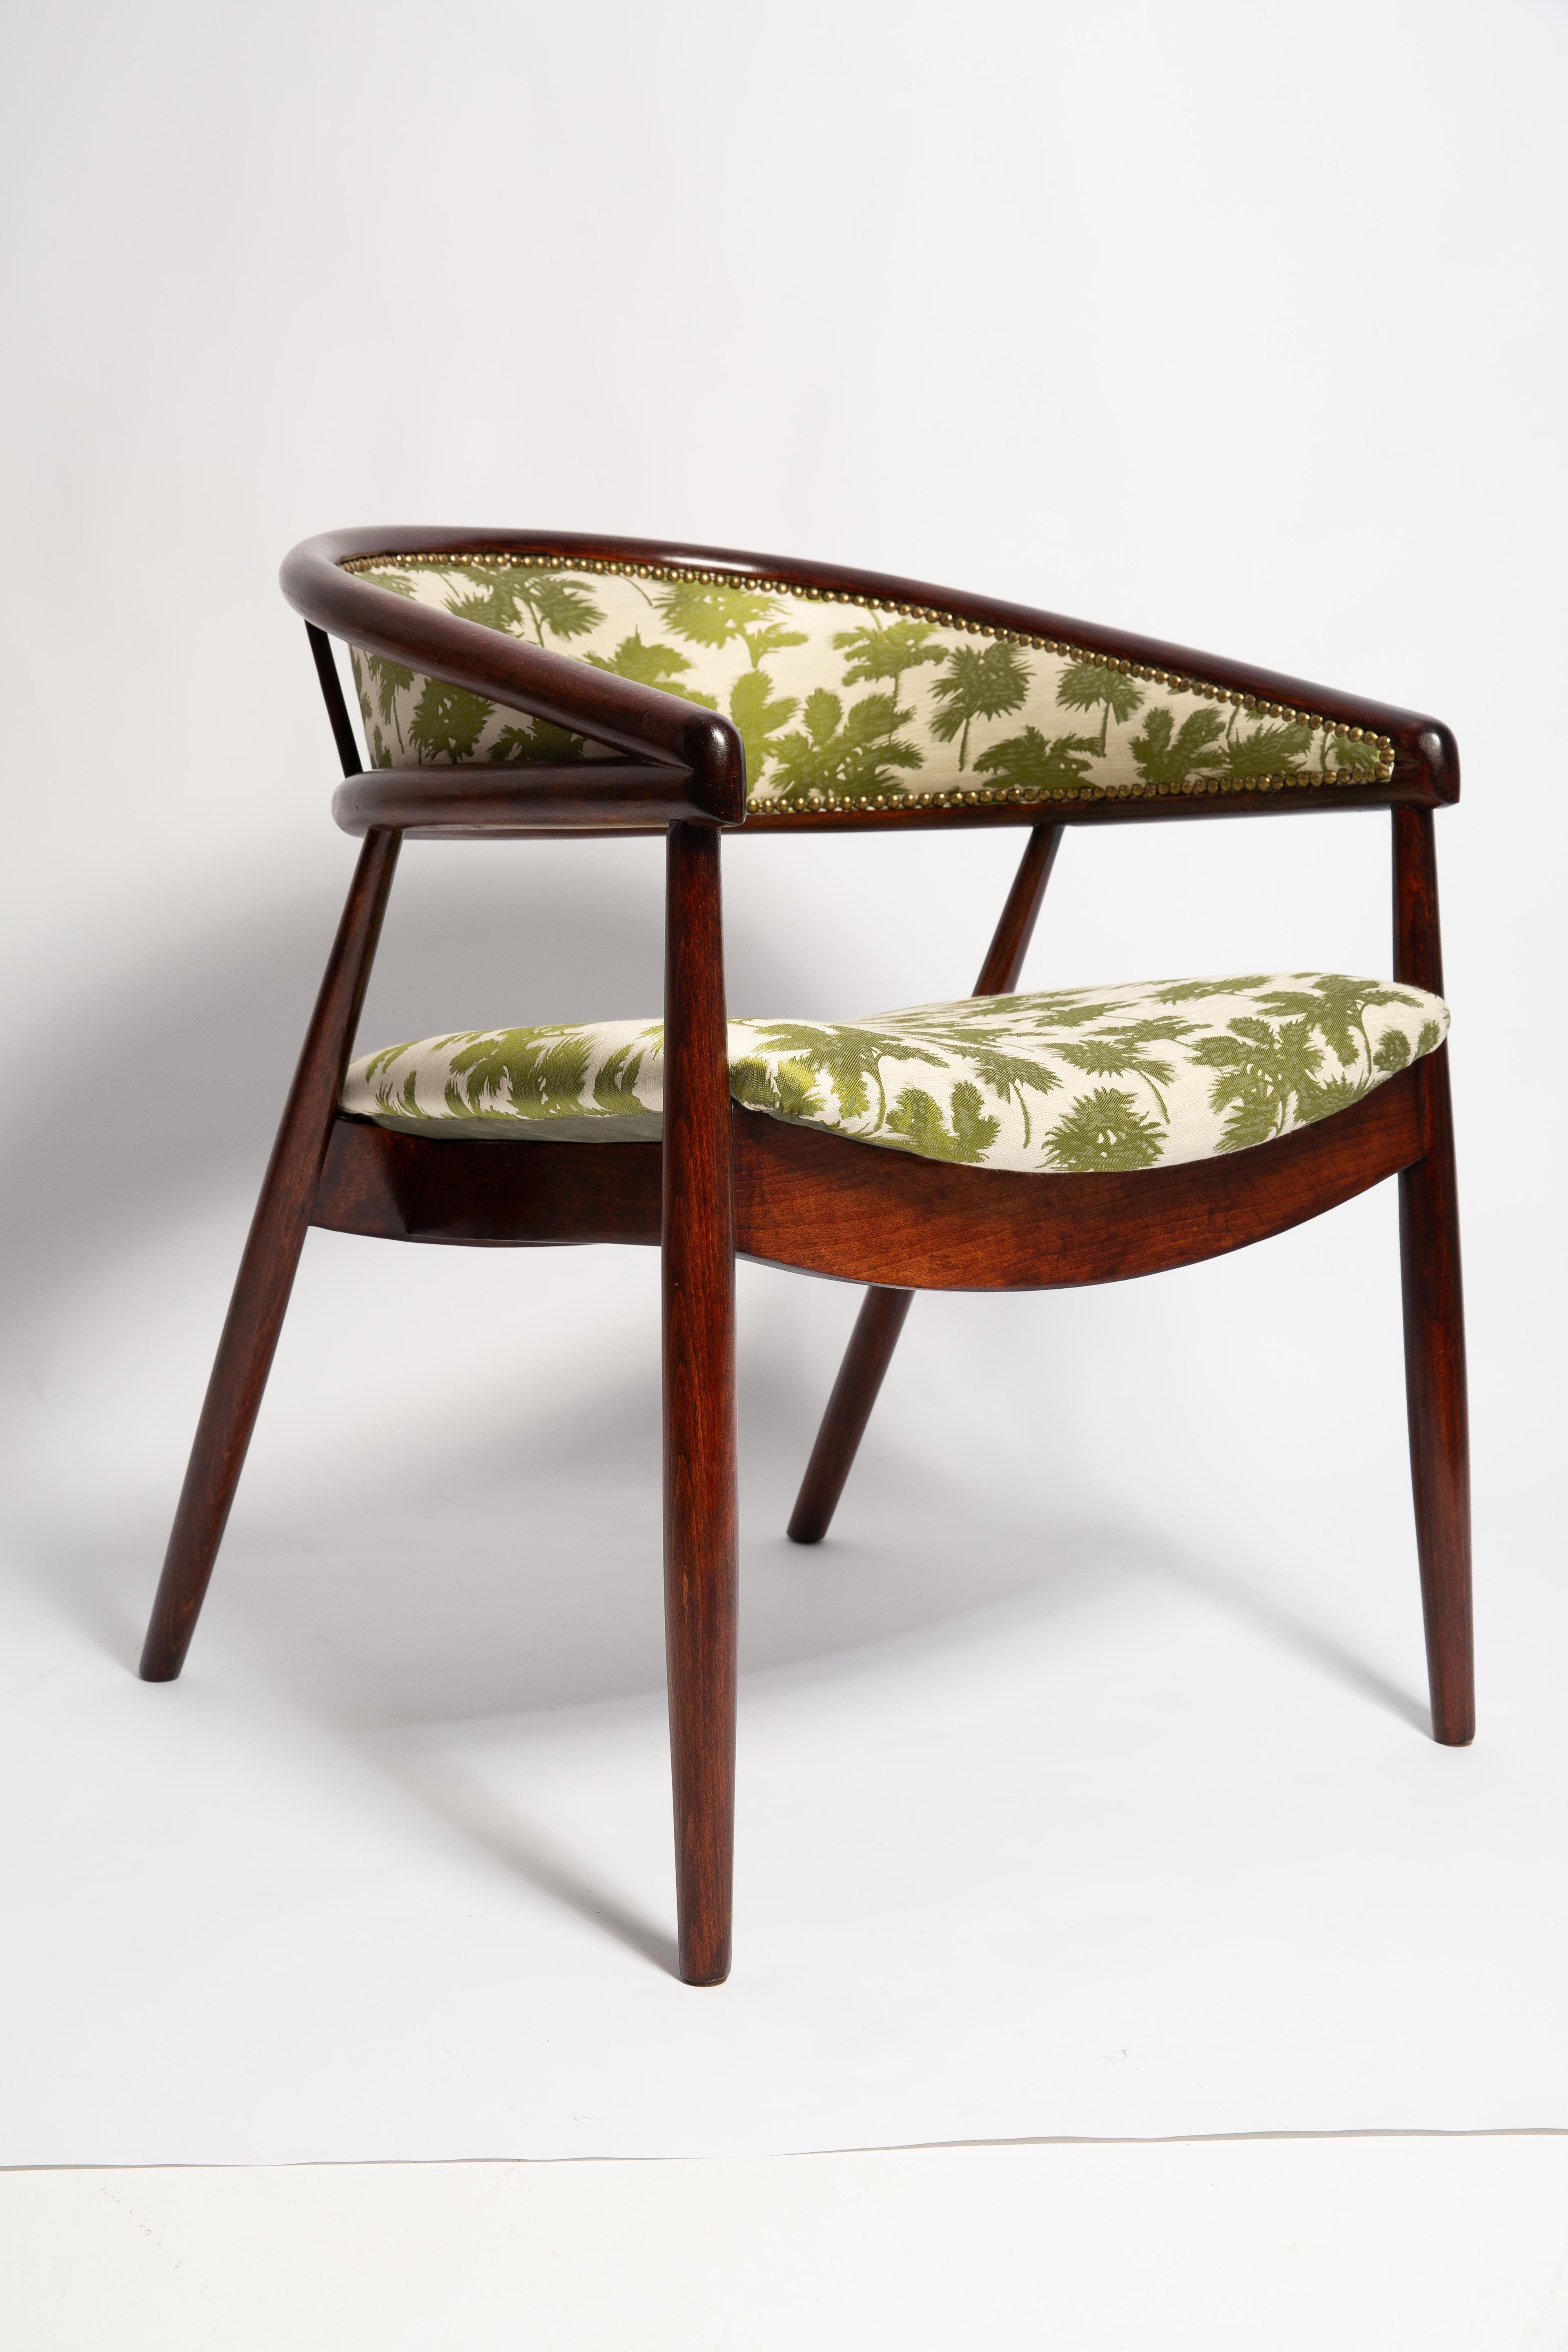 Pair of Mid Century B-3300 Armchairs, Be Bop A Lula Jacquard, 1960s, Europe For Sale 4